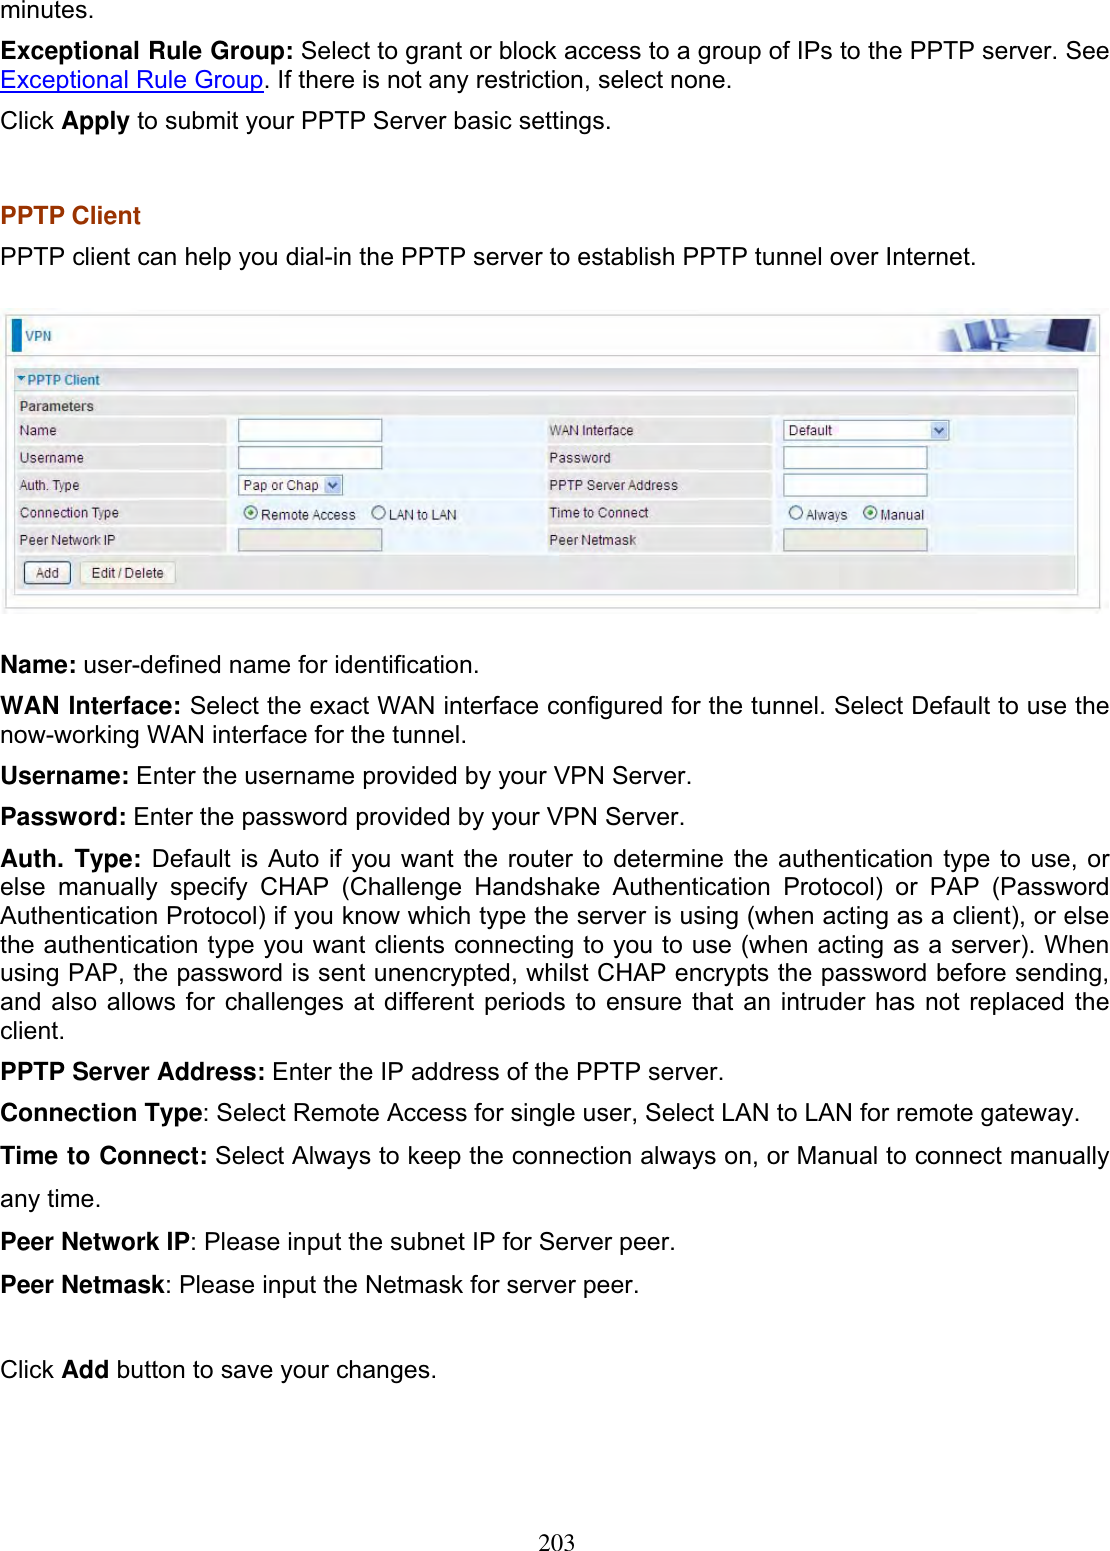 203minutes.Exceptional Rule Group: Select to grant or block access to a group of IPs to the PPTP server. See Exceptional Rule Group. If there is not any restriction, select none. Click Apply to submit your PPTP Server basic settings. PPTP Client PPTP client can help you dial-in the PPTP server to establish PPTP tunnel over Internet. Name: user-defined name for identification. WAN Interface: Select the exact WAN interface configured for the tunnel. Select Default to use the now-working WAN interface for the tunnel.Username: Enter the username provided by your VPN Server. Password: Enter the password provided by your VPN Server.Auth. Type: Default is Auto if you want the router to determine the authentication type to use, or else manually specify CHAP (Challenge Handshake Authentication Protocol) or PAP (Password Authentication Protocol) if you know which type the server is using (when acting as a client), or else the authentication type you want clients connecting to you to use (when acting as a server). When using PAP, the password is sent unencrypted, whilst CHAP encrypts the password before sending, and also allows for challenges at different periods to ensure that an intruder has not replaced the client.PPTP Server Address: Enter the IP address of the PPTP server. Connection Type: Select Remote Access for single user, Select LAN to LAN for remote gateway. Time to Connect: Select Always to keep the connection always on, or Manual to connect manually any time. Peer Network IP: Please input the subnet IP for Server peer. Peer Netmask: Please input the Netmask for server peer. Click Add button to save your changes. 